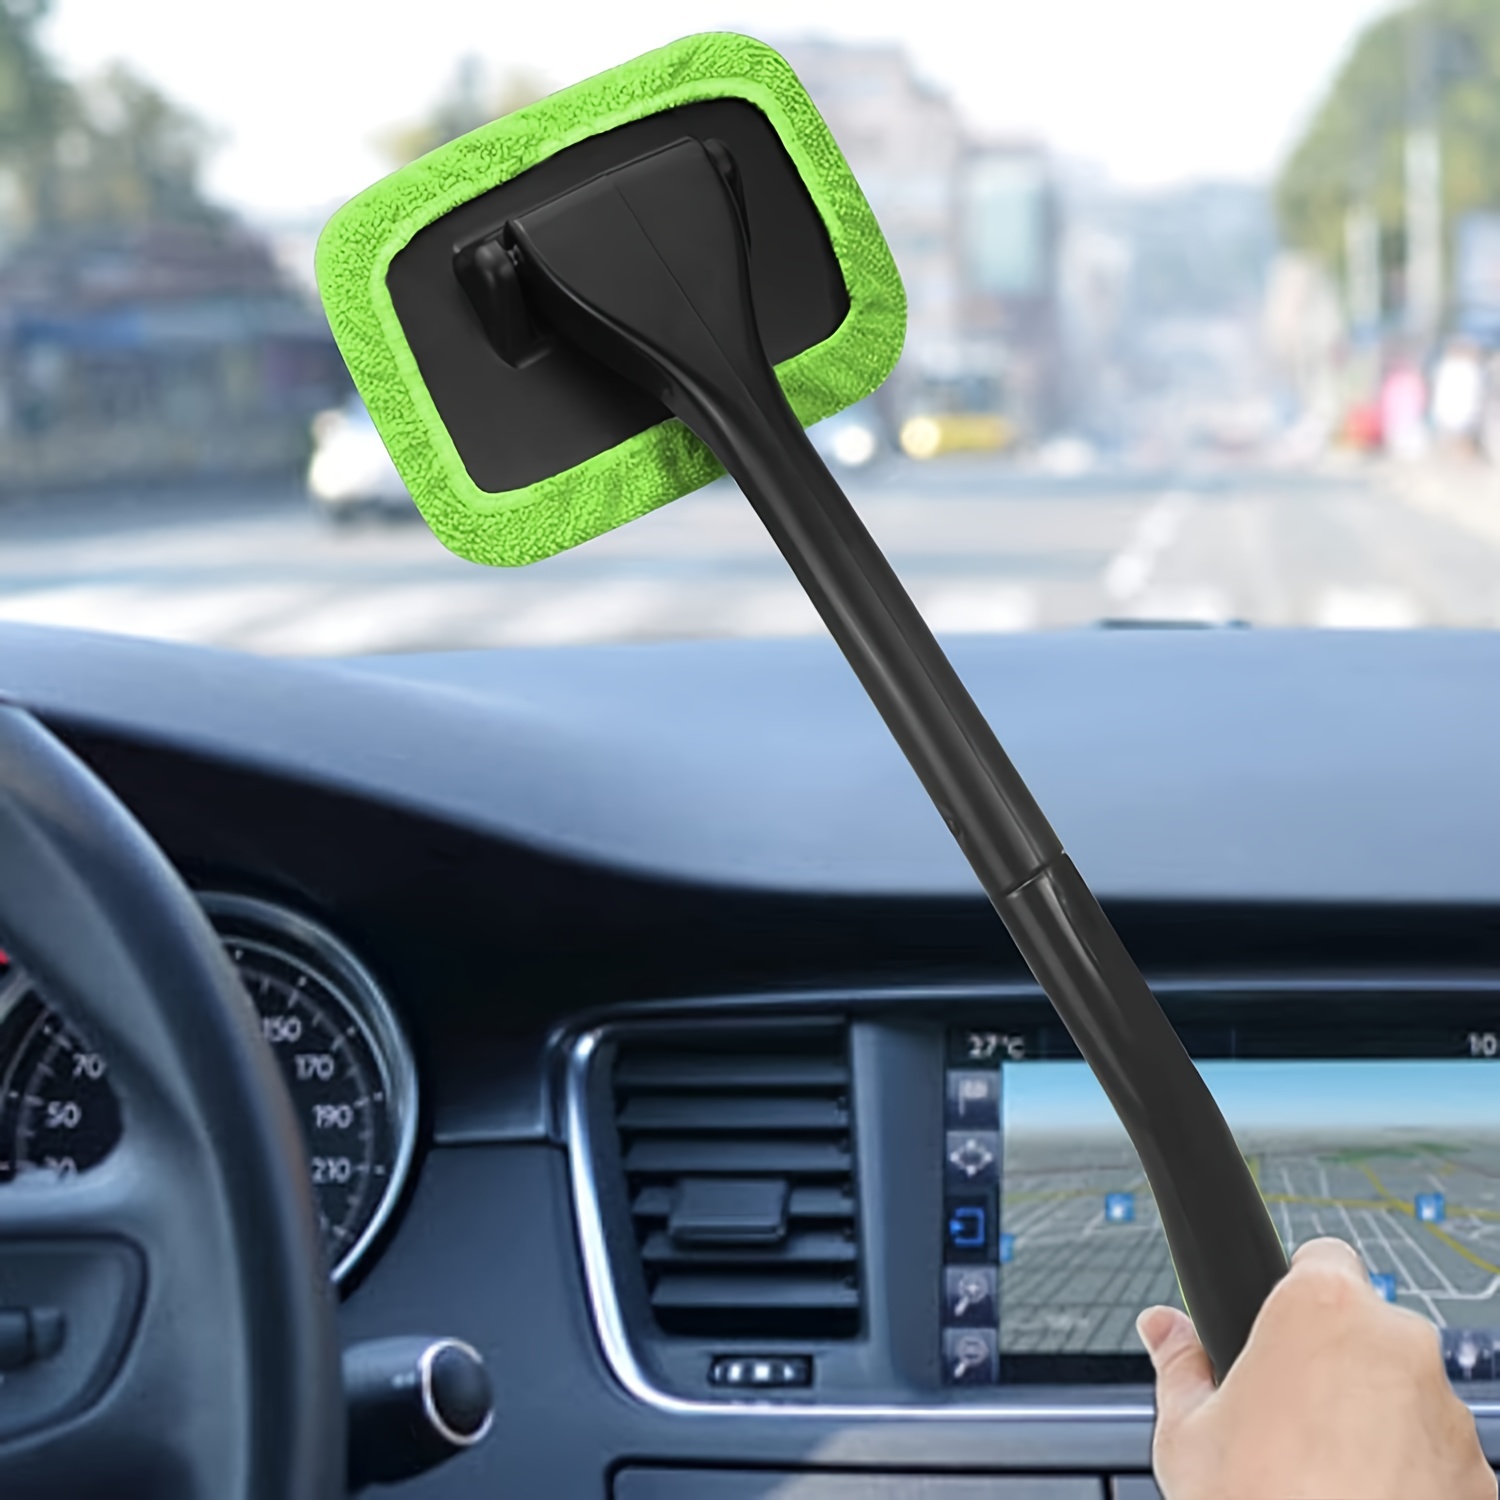 1pc Car Windshield Wiper Tool For Clearing Fog And Cleaning, With Cleaning  Towel. Use This Premium Car Window Cleaning Kit To Easily Clean Your Car  Windows